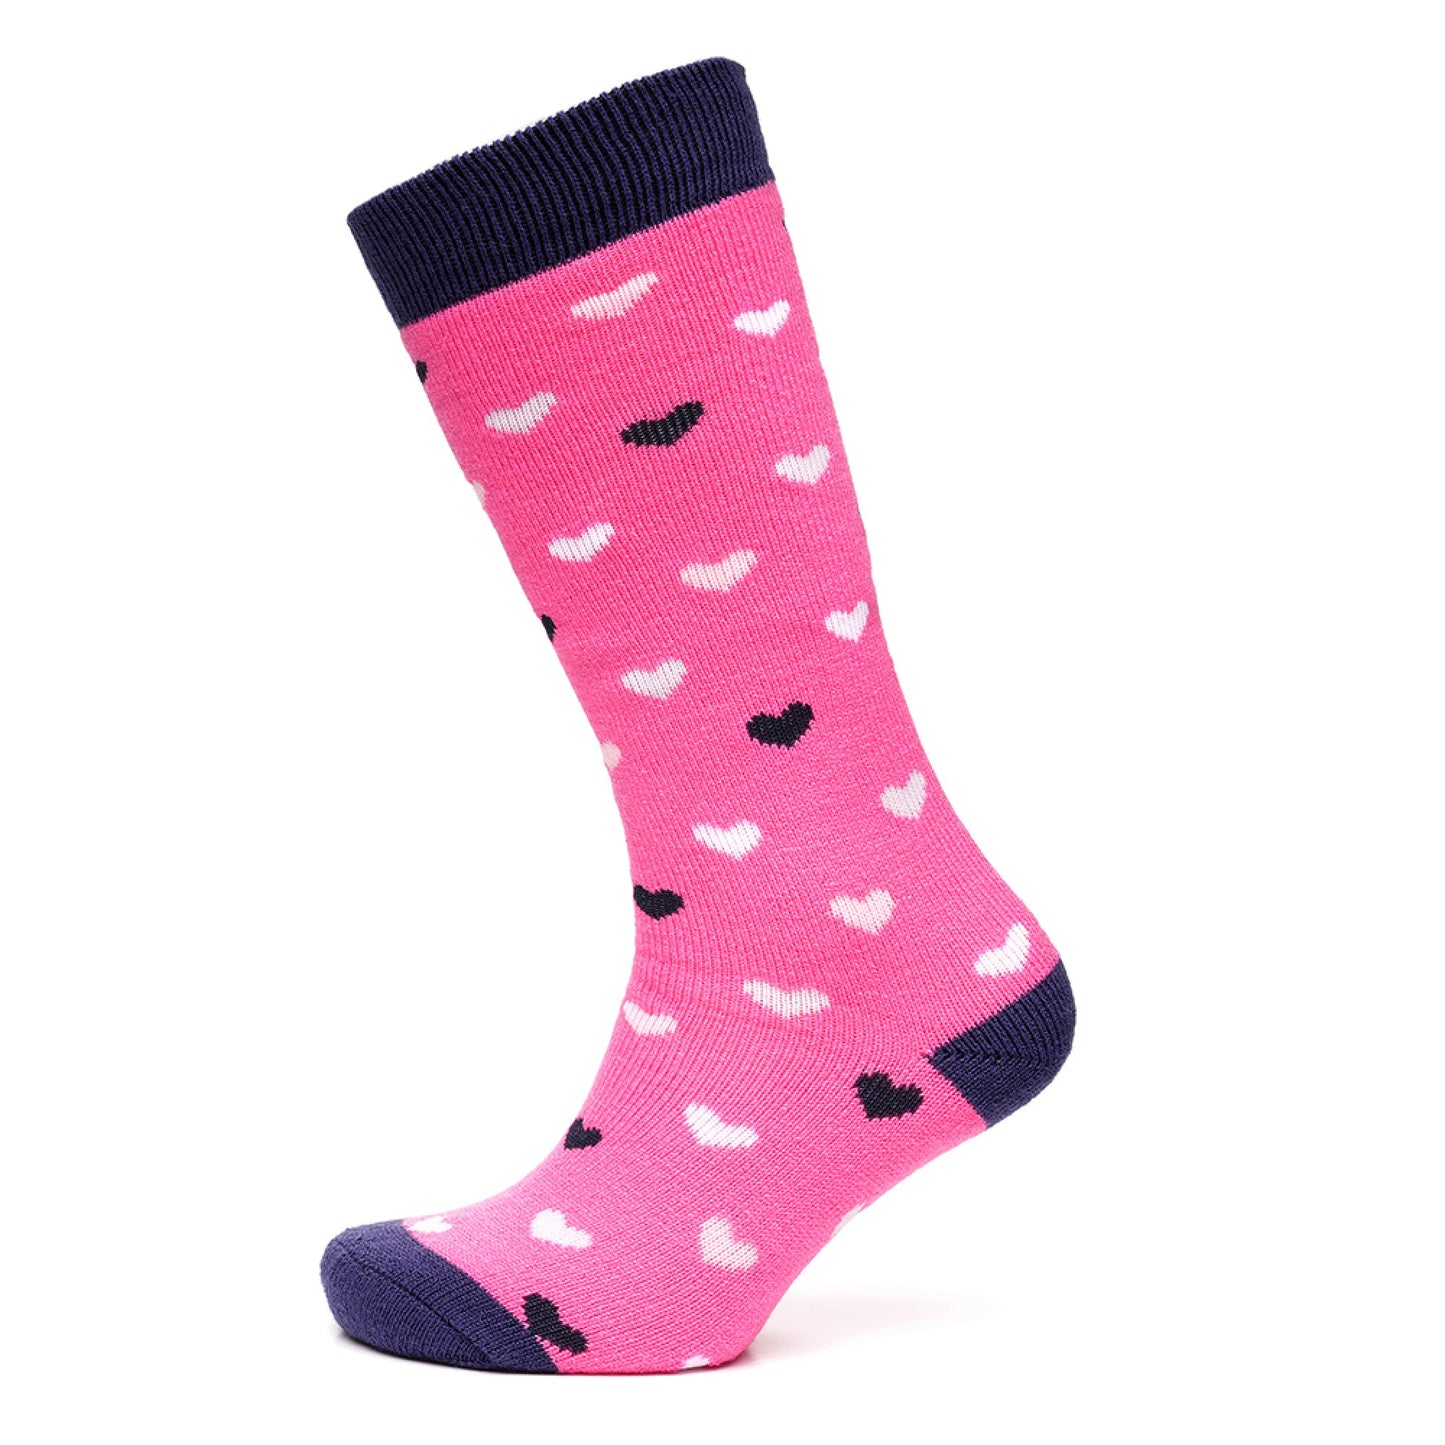 3 Pairs Ladies Wellington Boot Welly Socks - Hearts, Stripes and Leopard